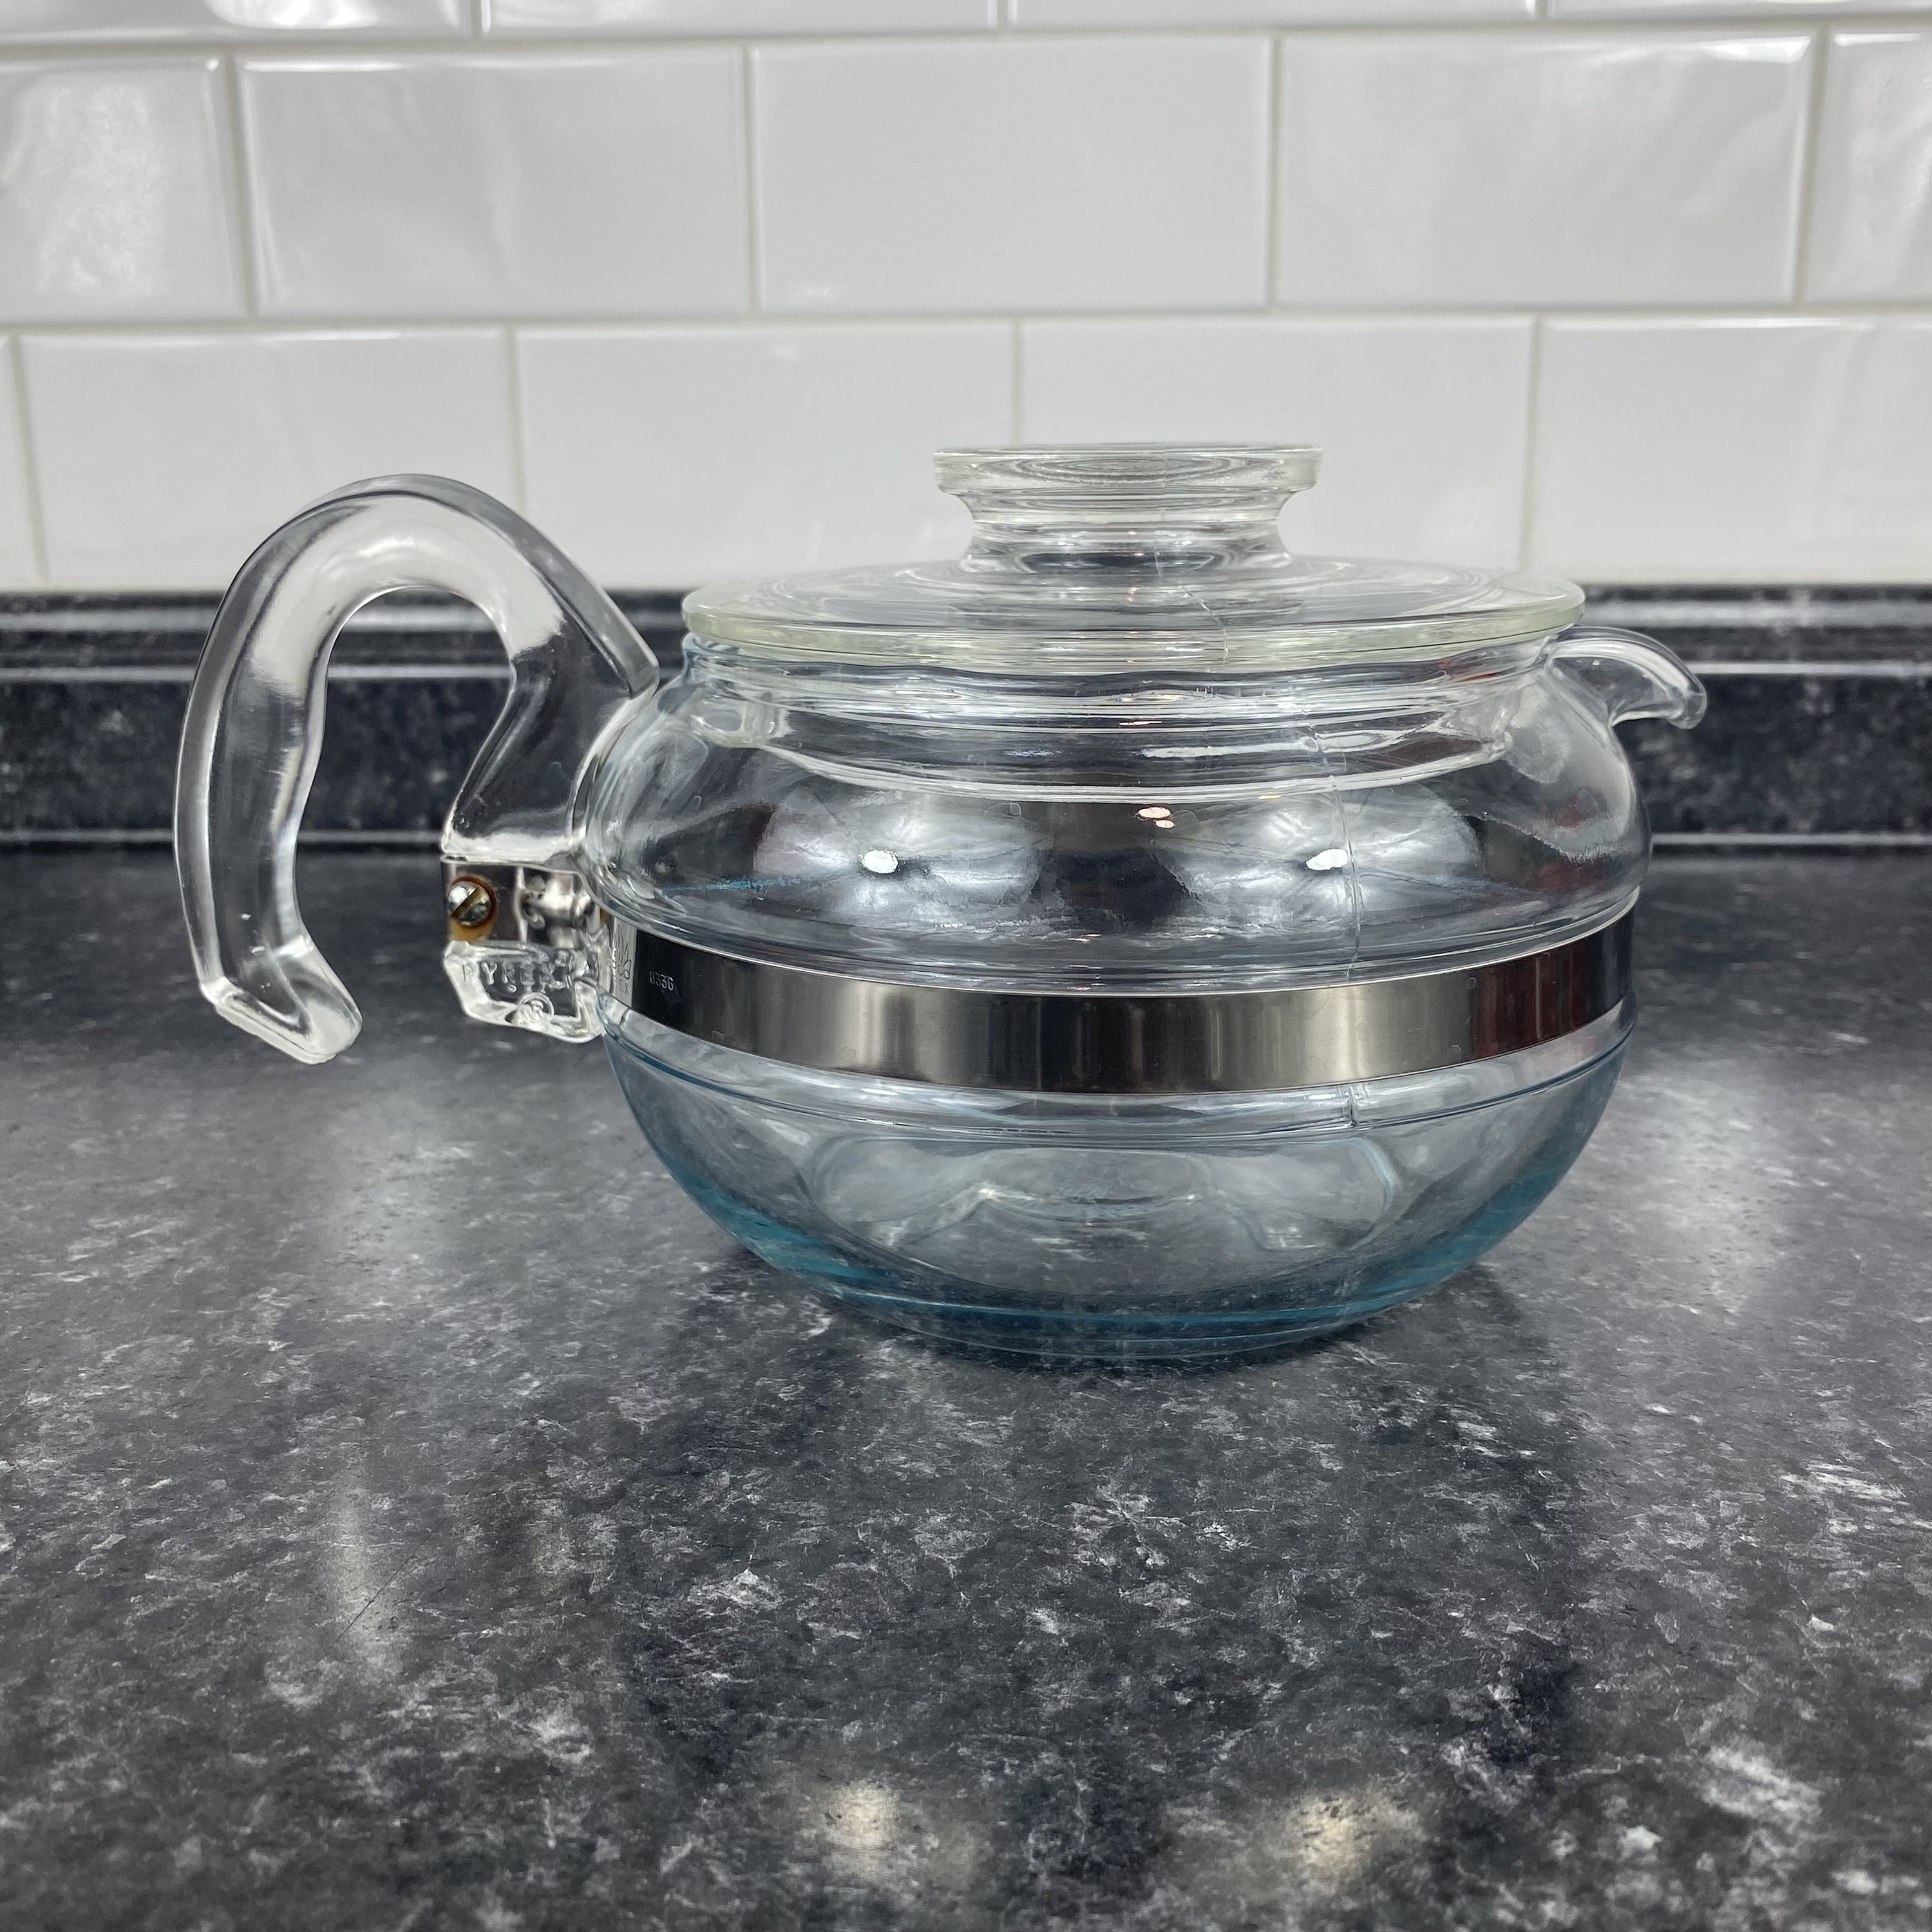 The aluminum parts in the 6 cup percolator I have say Made in Canada. Is  this common? : r/Pyrex_Love